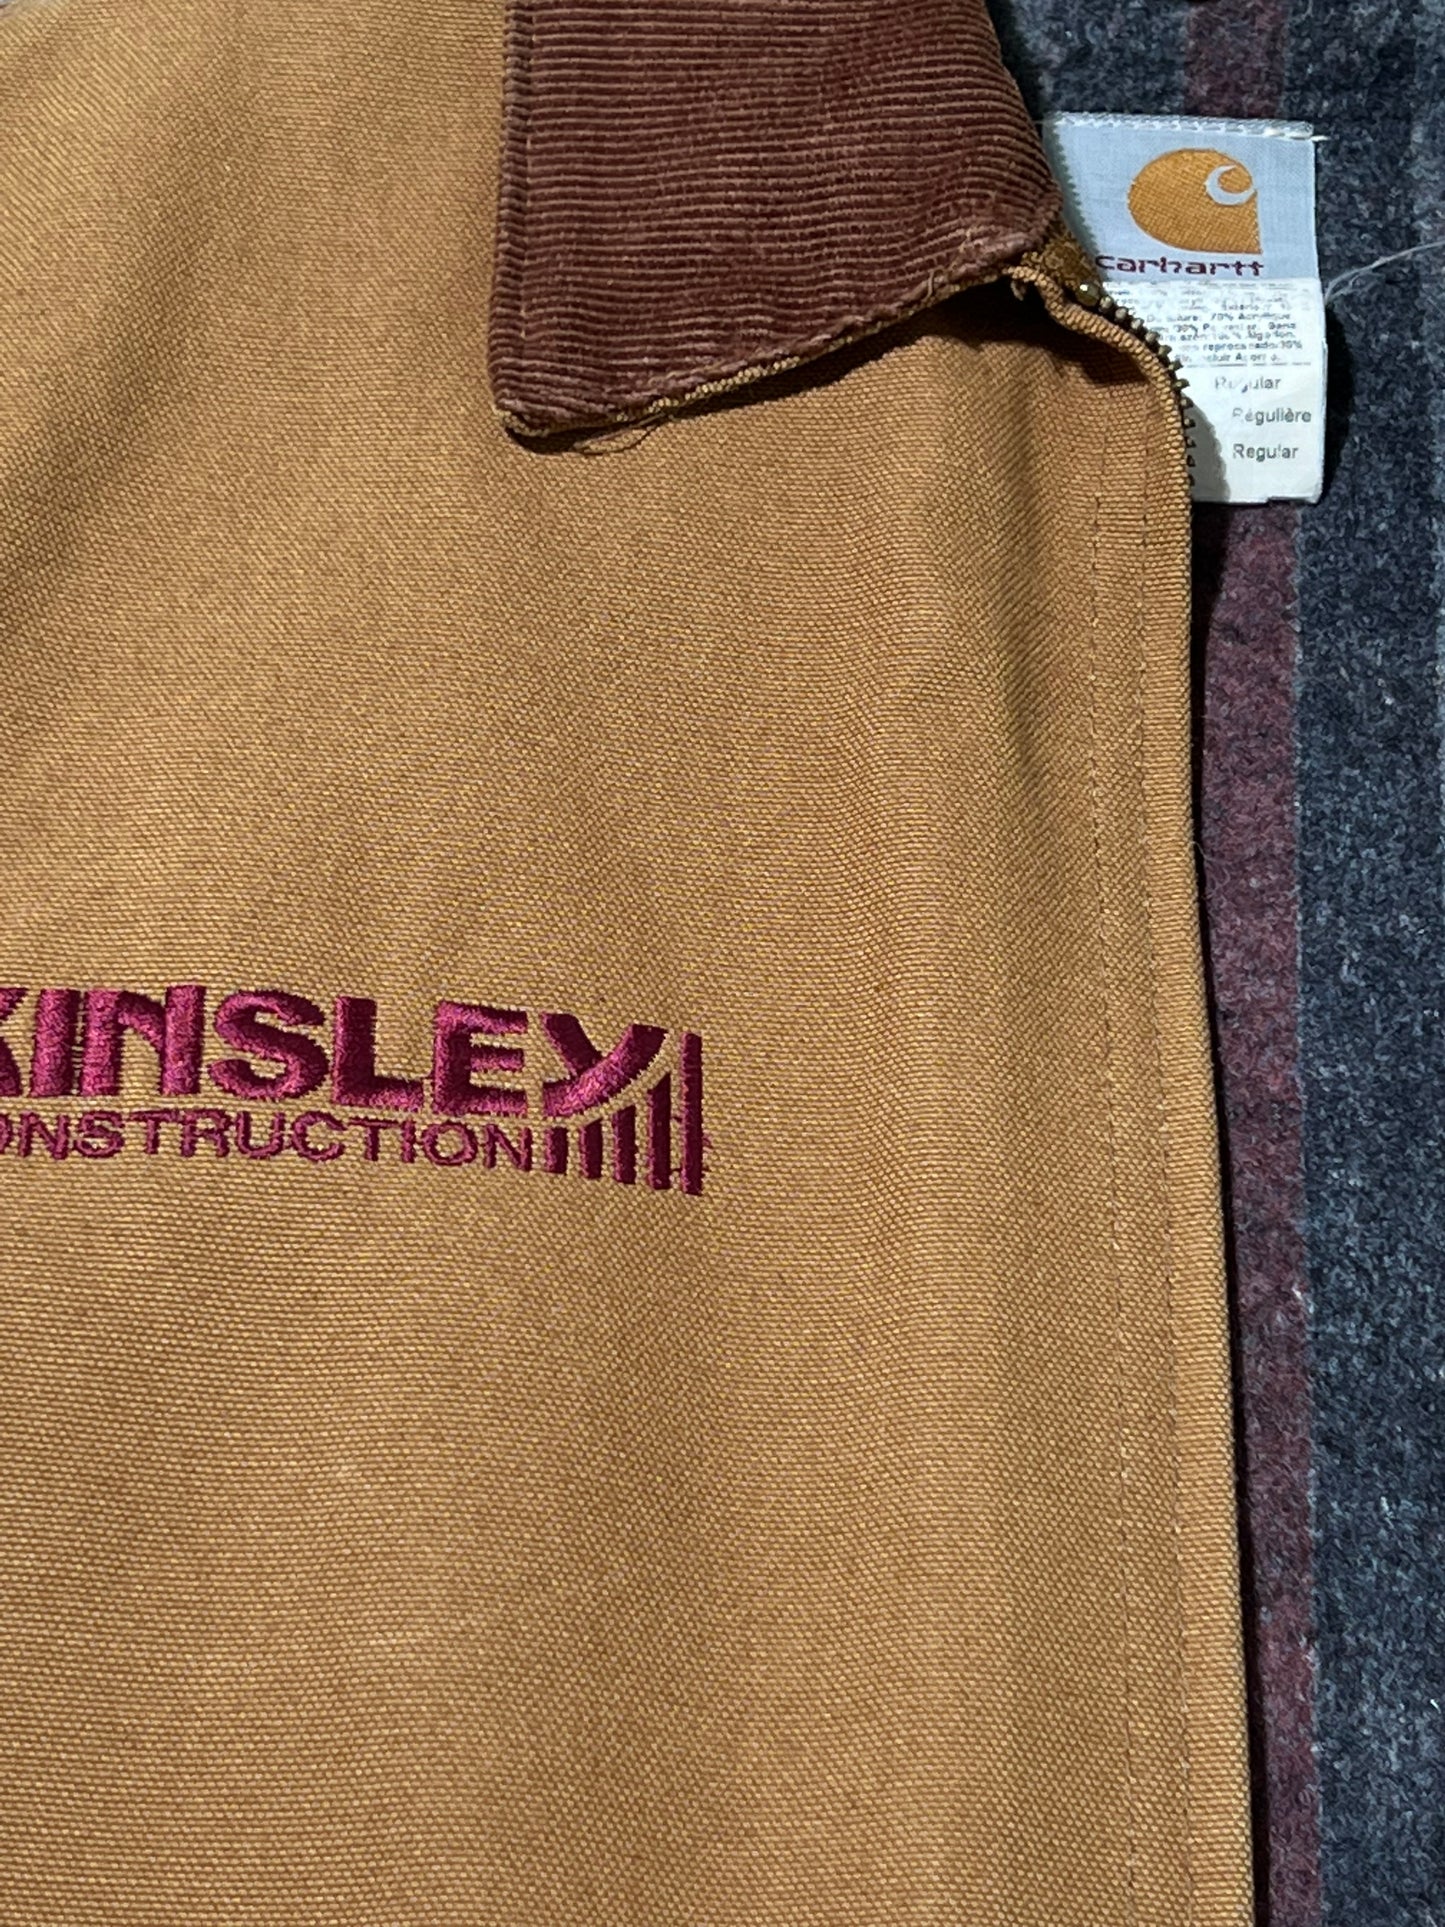 brown canvas jacket text